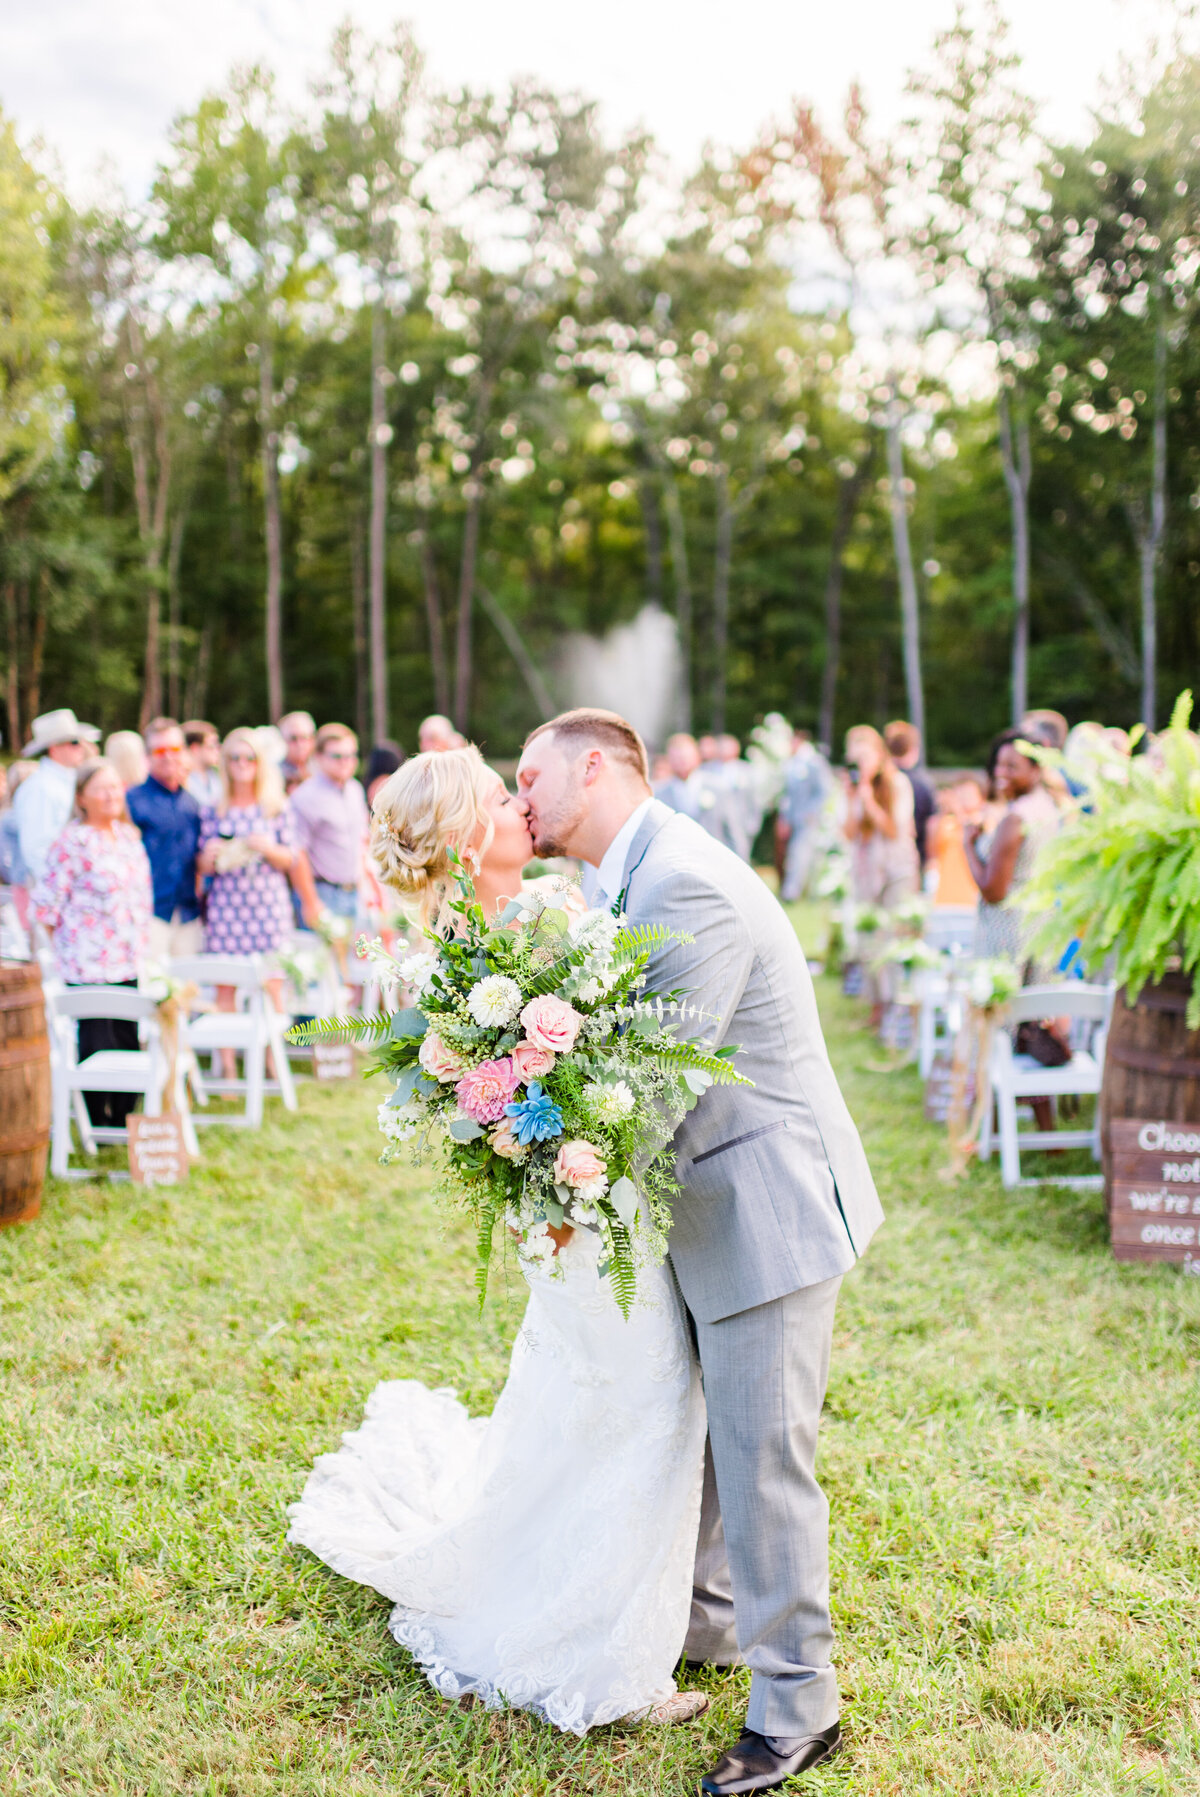 Courtney + Dylan's Wedding Day - Photography by Gerri Anna-491